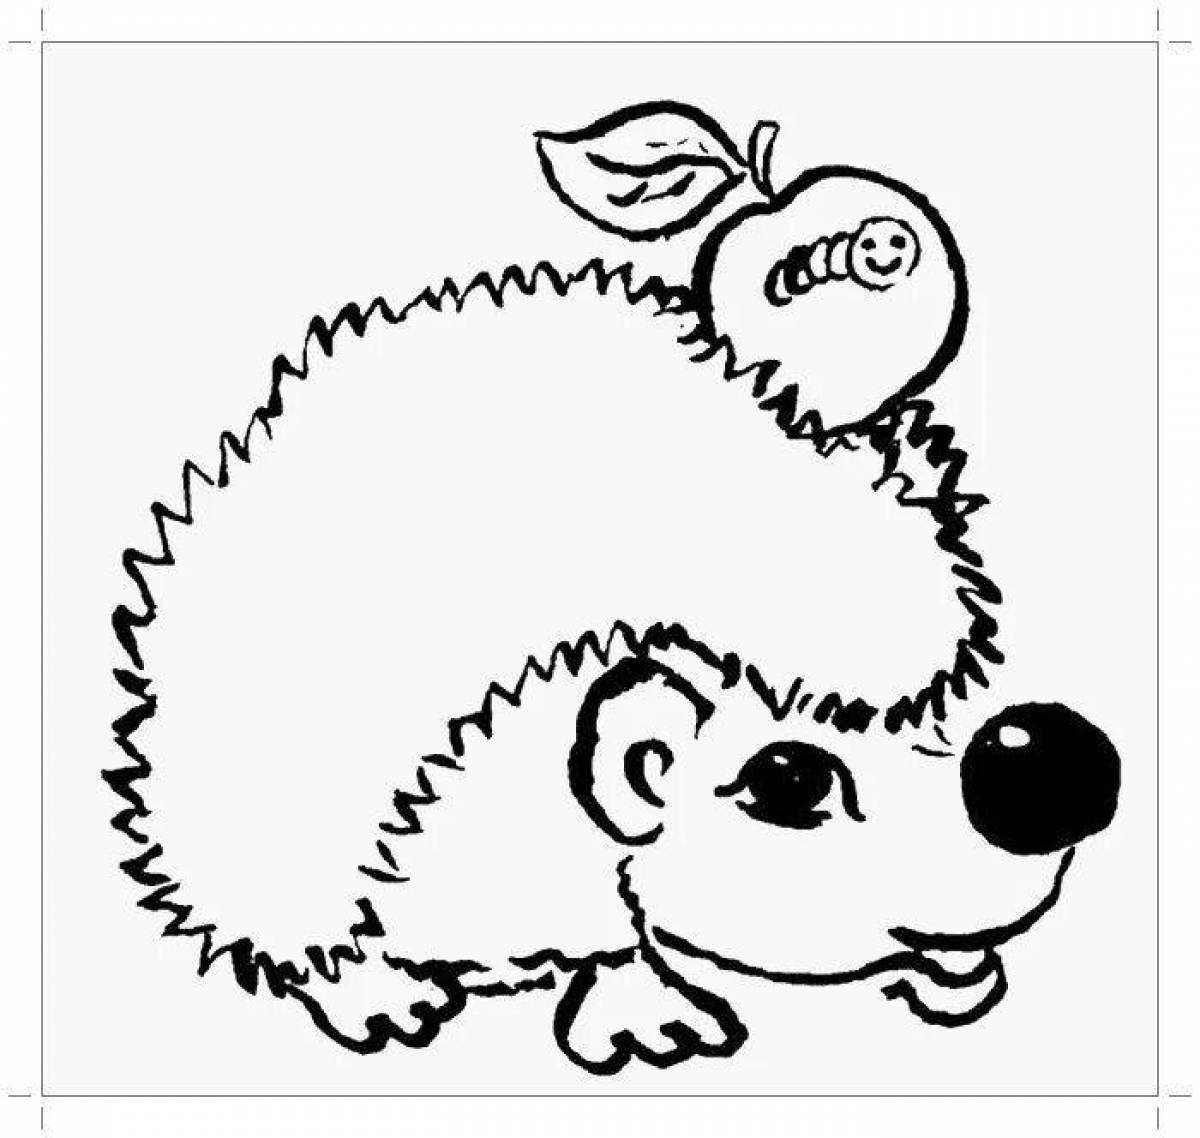 Drawing of an adorable hedgehog